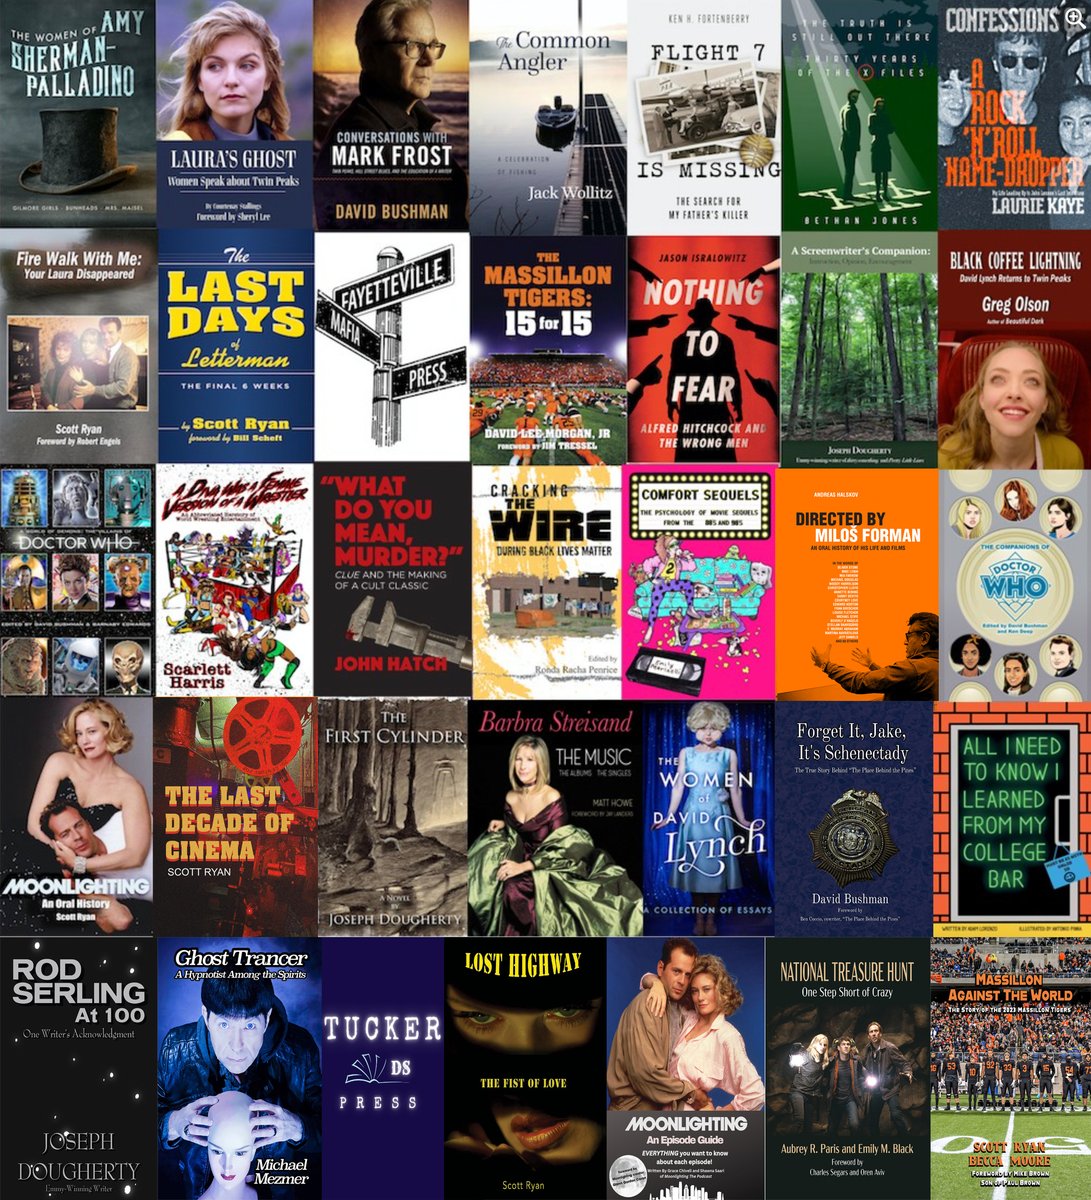 FMP/Tucker has published 34 books since 2018. (Fun Fact, most companies won't even entertain us because that isn't enought to be considered a 'real' publisher) We have a wide variety and high quality. Support a small business at TuckerDSPress.com #newbooks #authors